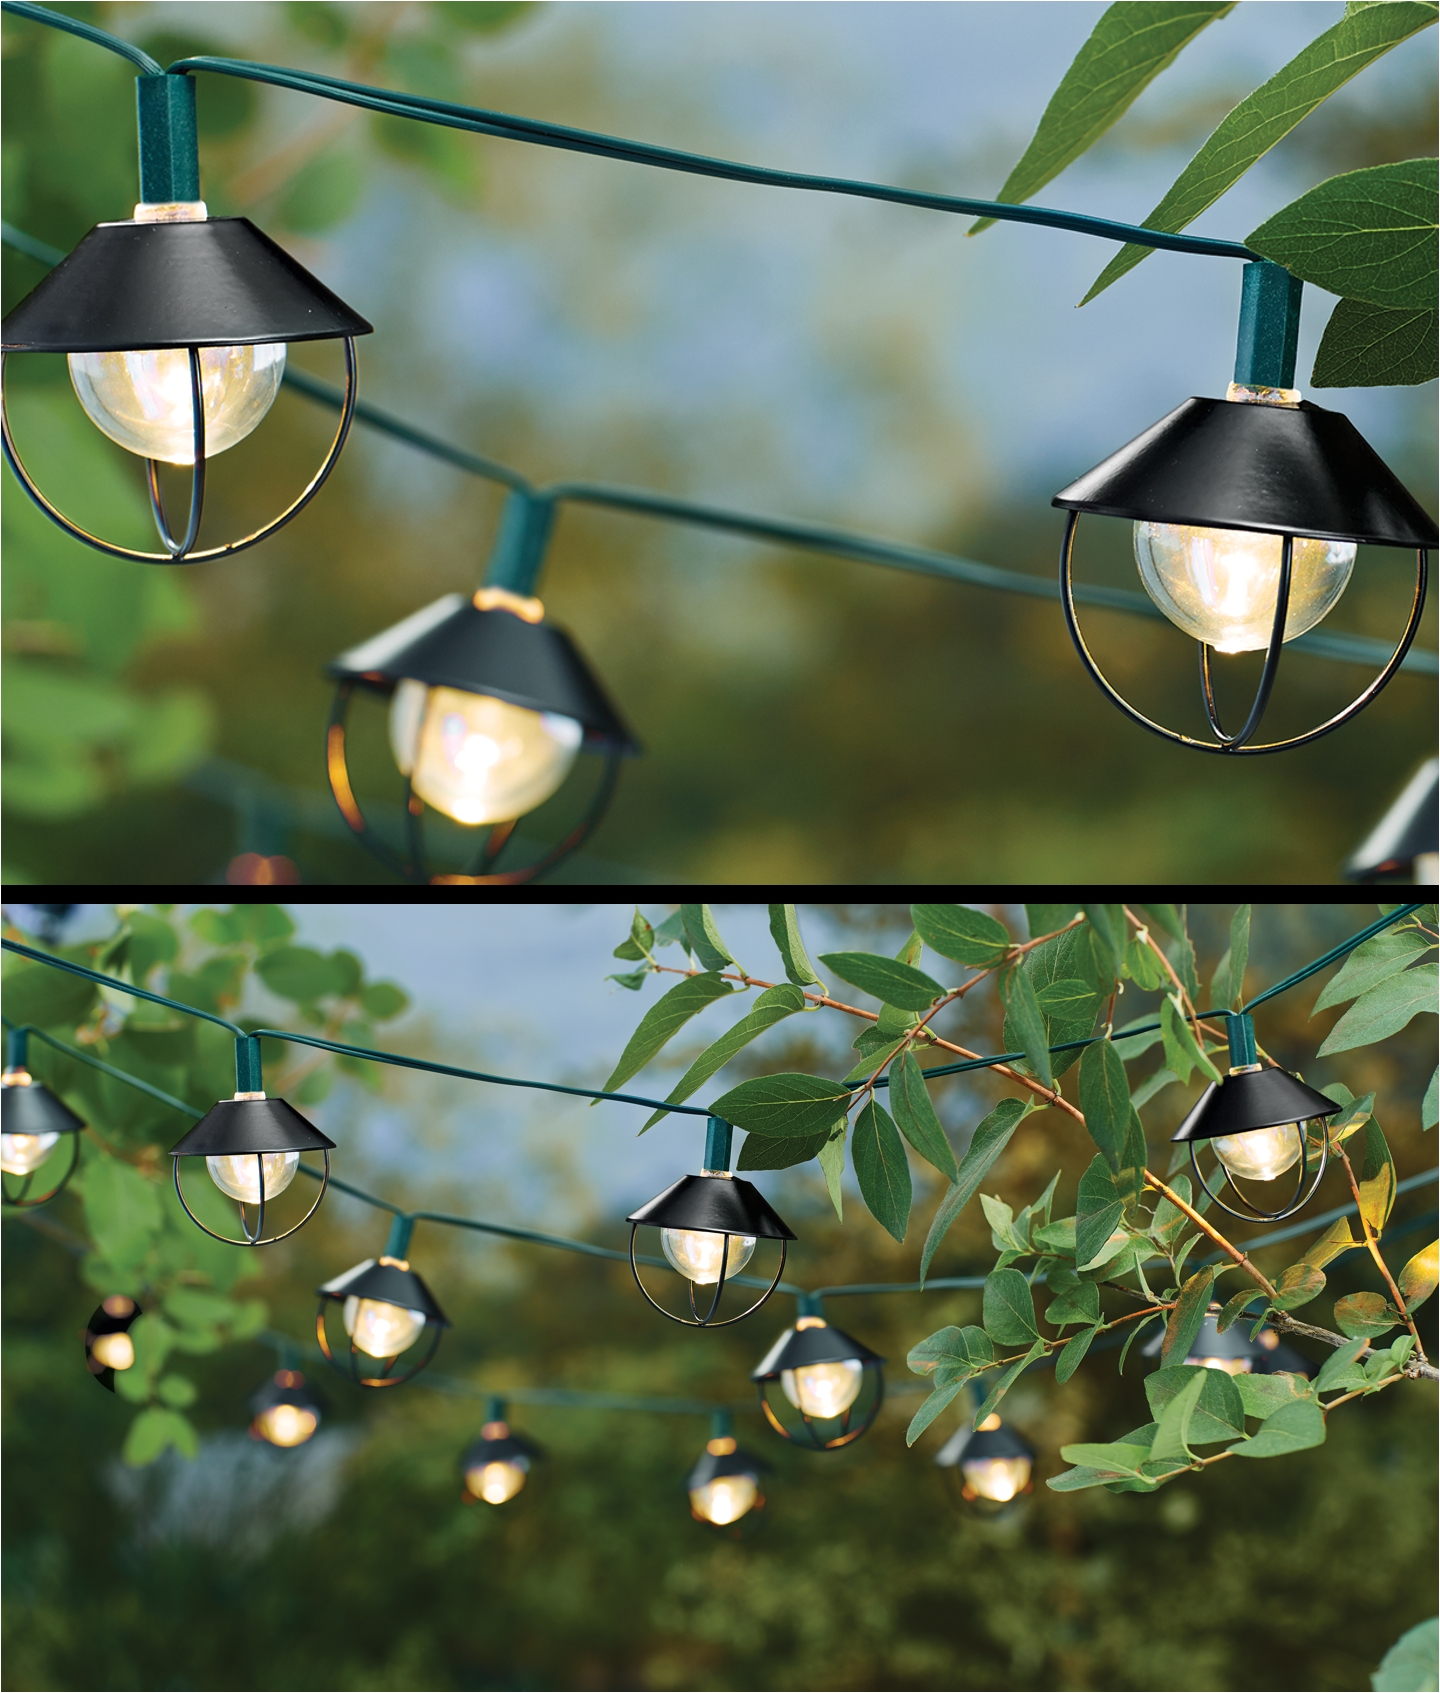 light up your patio garden or deck with the charming little industrial looking 20ct